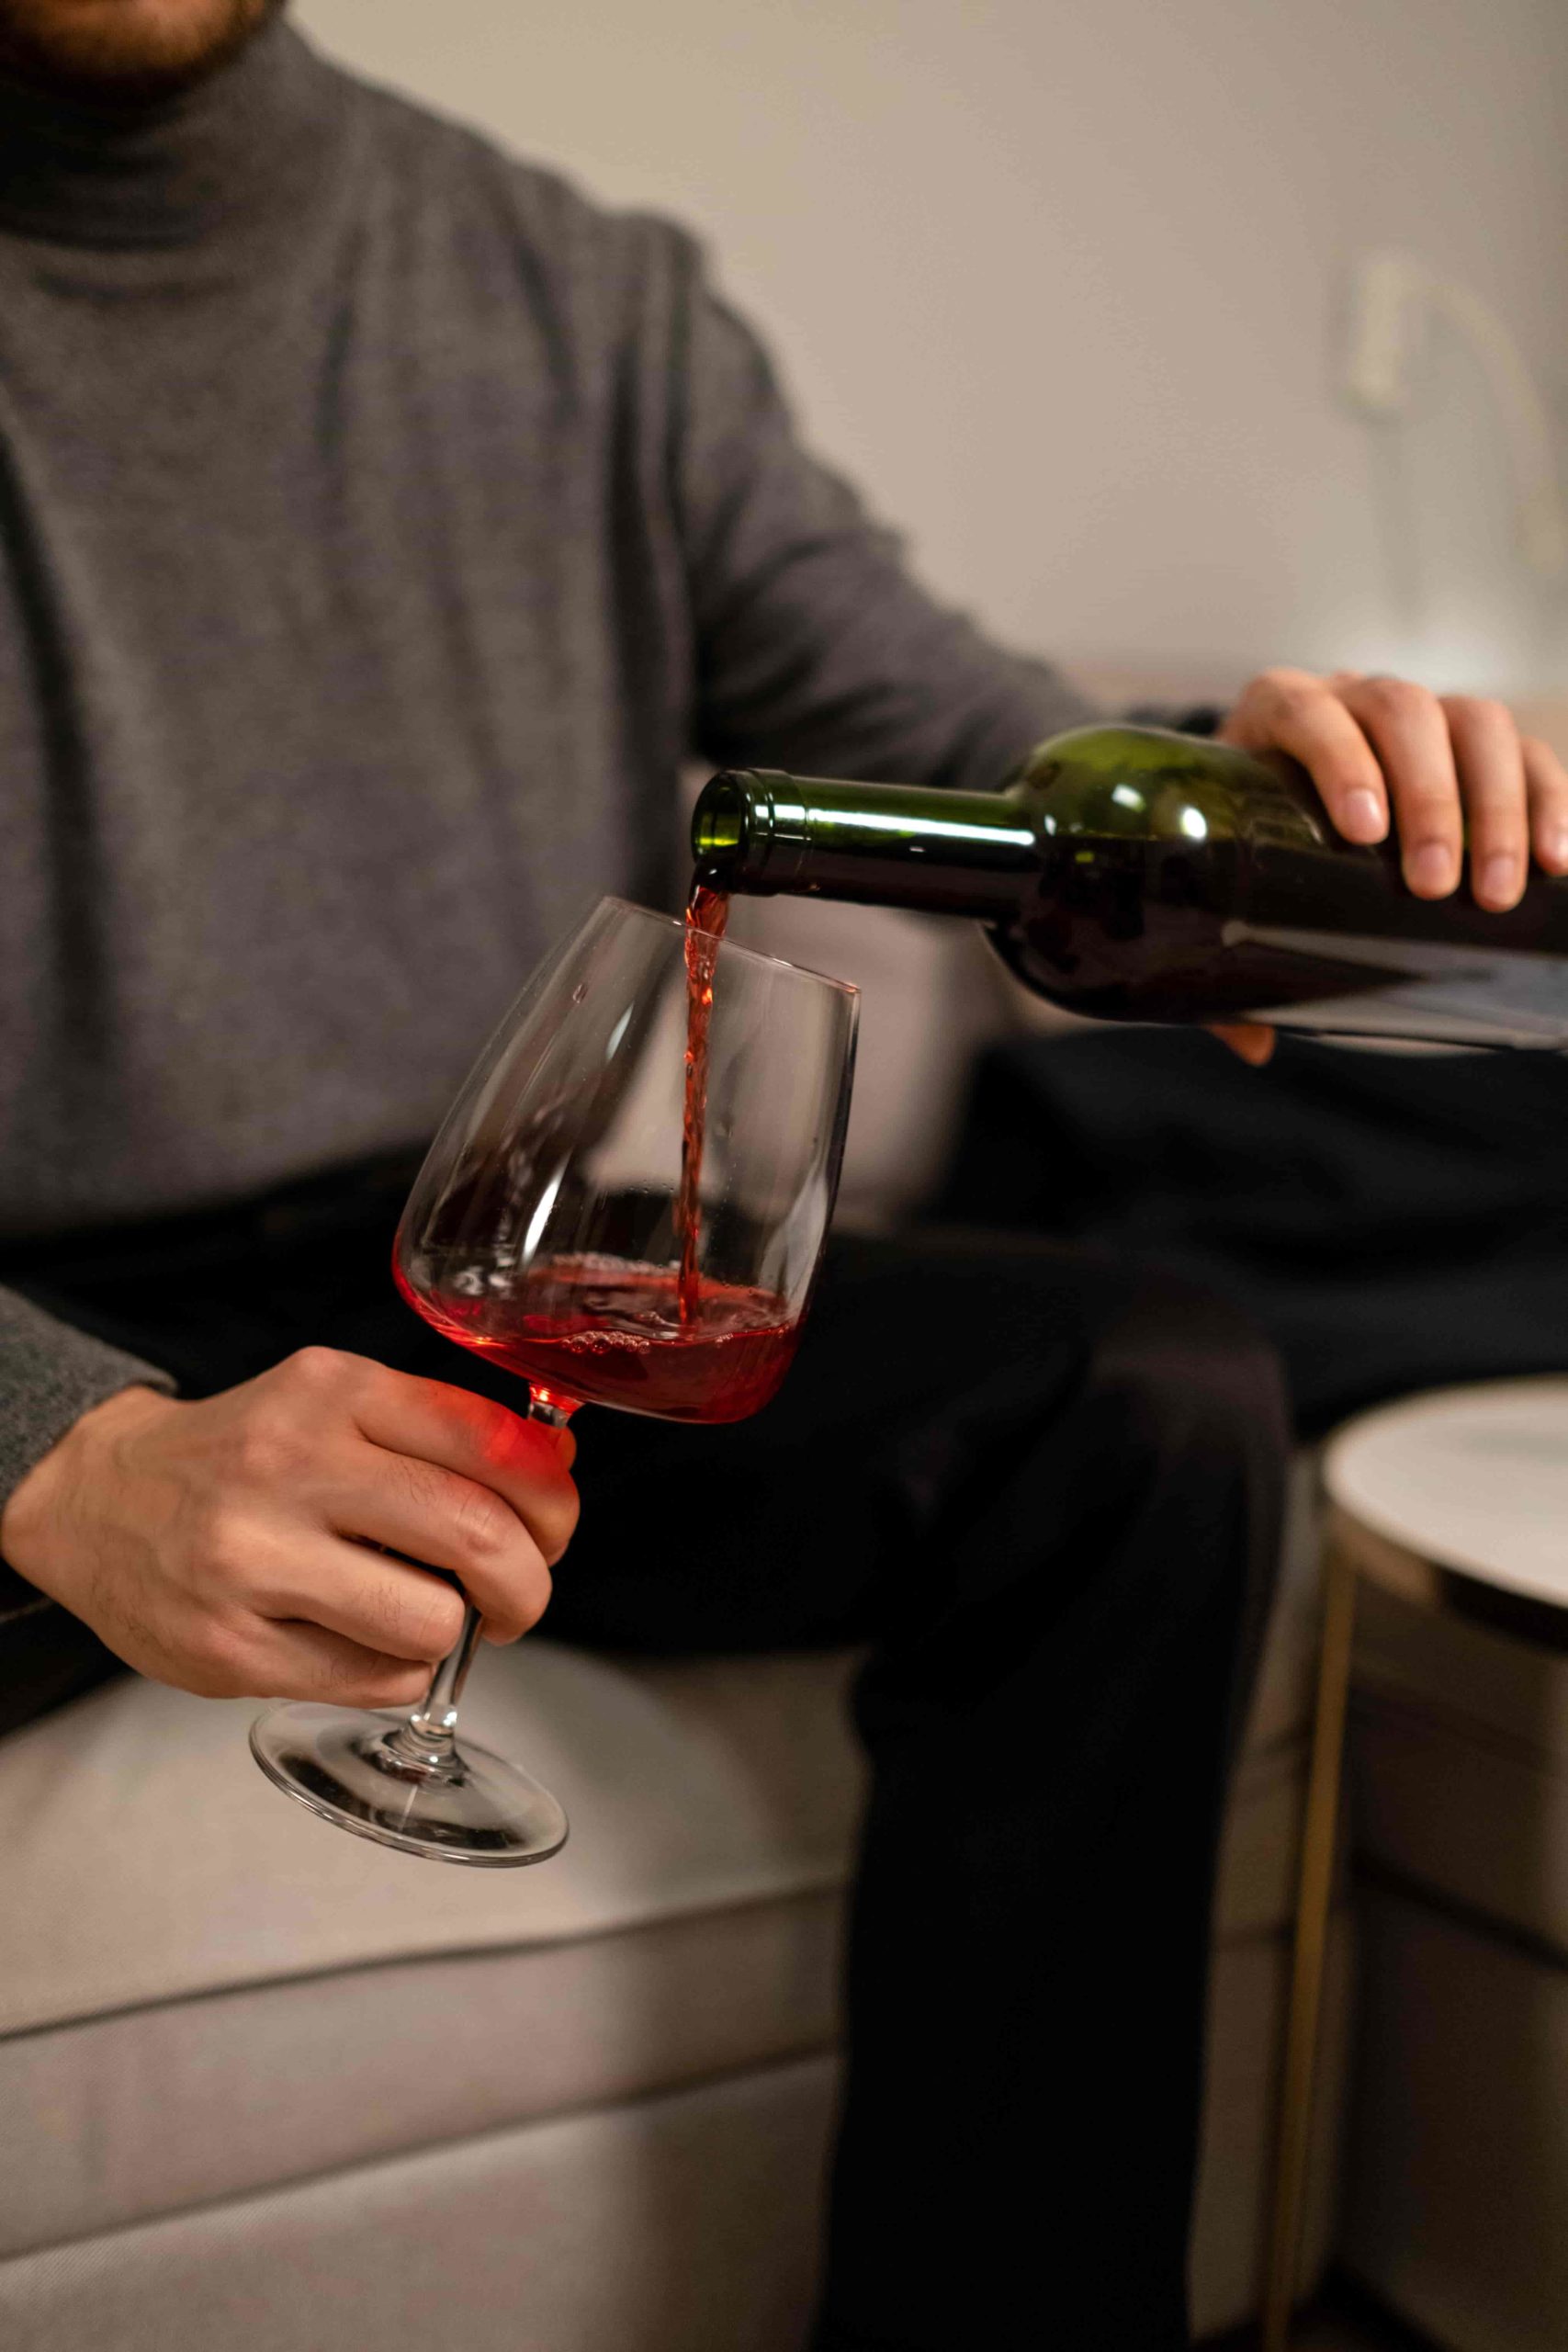 Drinking red wine reduces risk of covid-19 infection, china study claims | weirdkaya